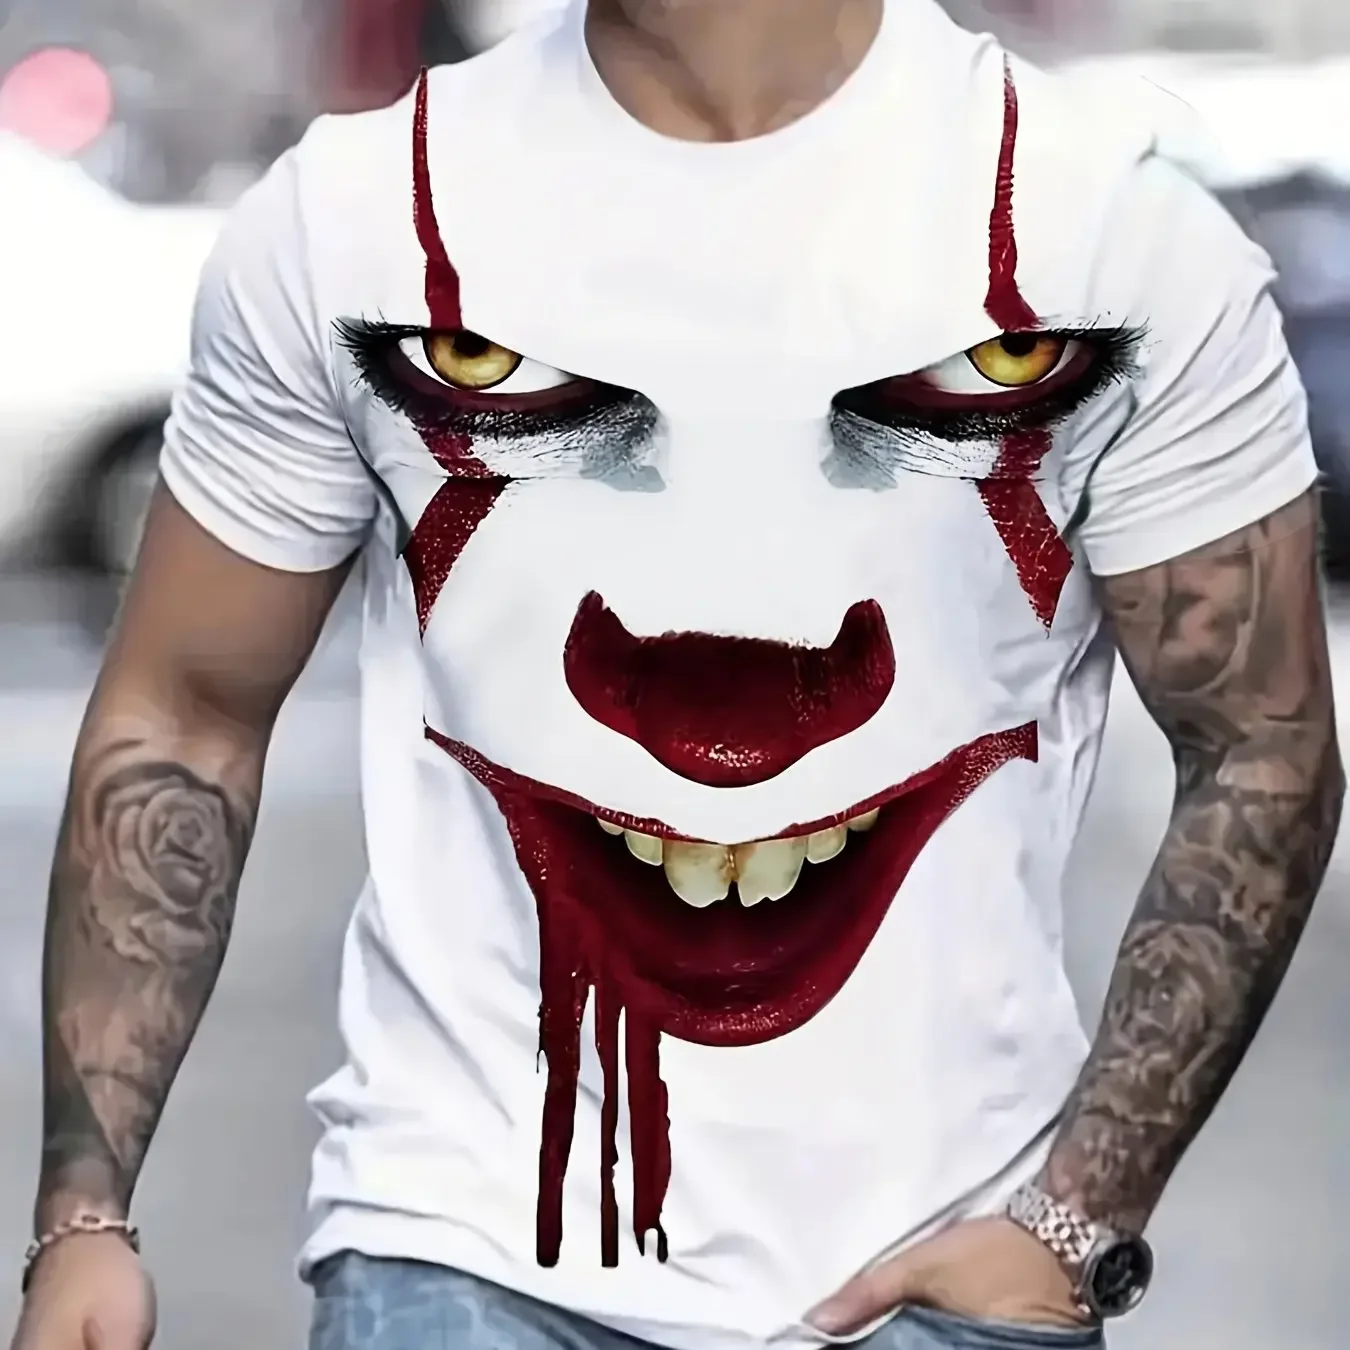 

Summer New Scary Clown 3D Printed Graphic T-shirt Loose and Comfortable O-neck Short-sleeved T-shirt Hip Hop Men's Street Wear